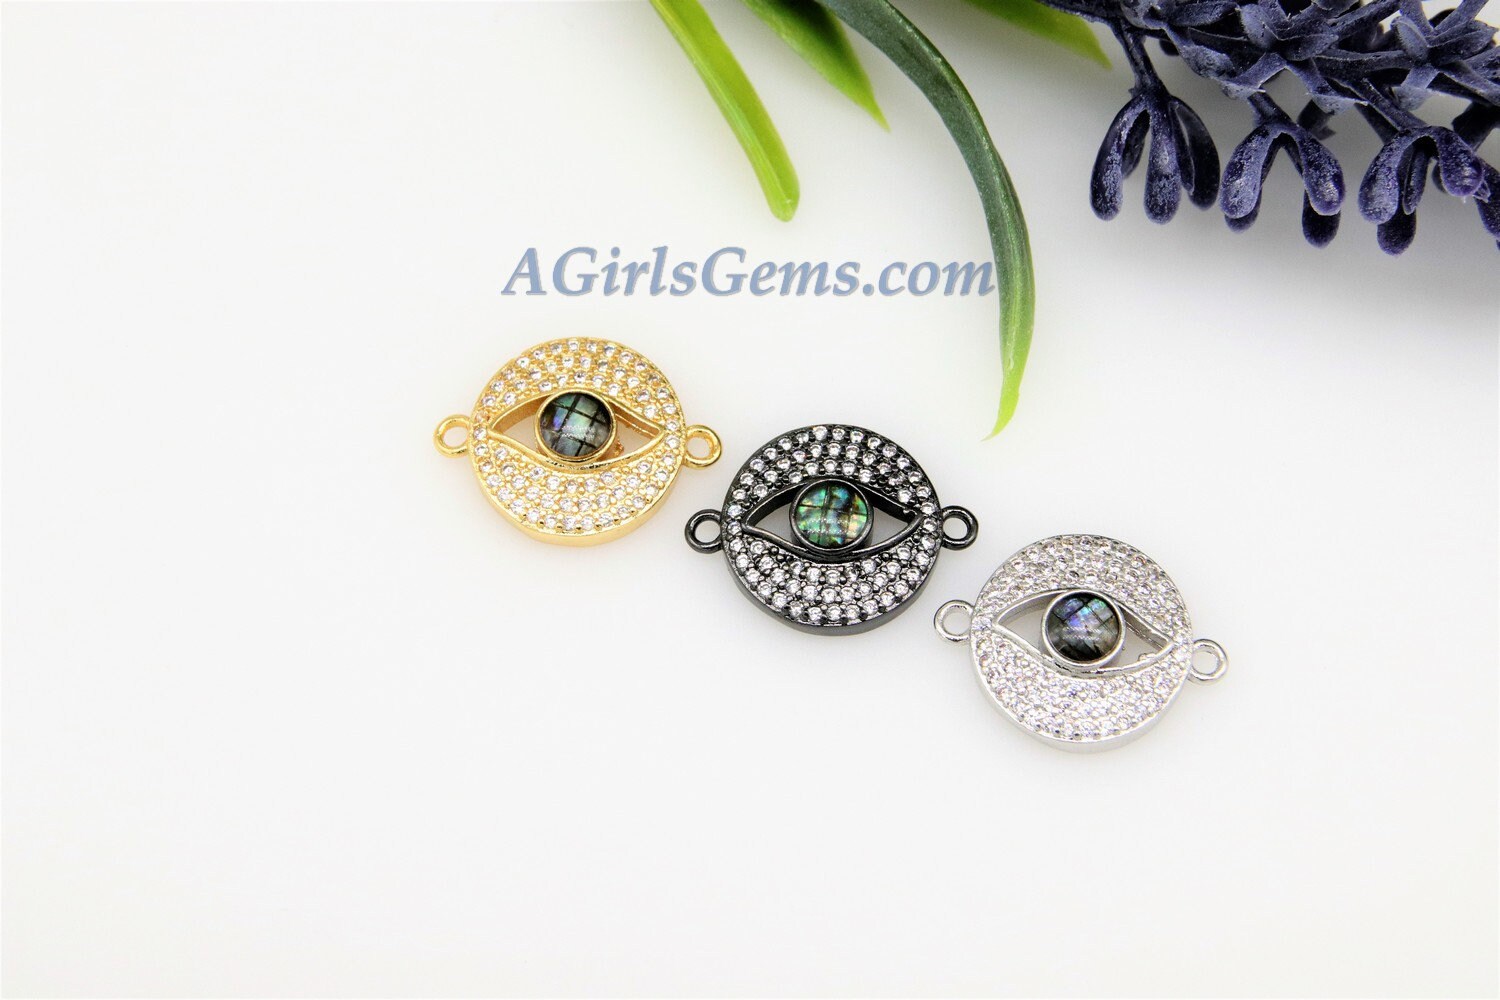 Evil Eye Connector, CZ Micro Pave Bracelet Charm Beads #22, Turkish Greek Blue Evil Eye, Round Disc for Jewelry Making